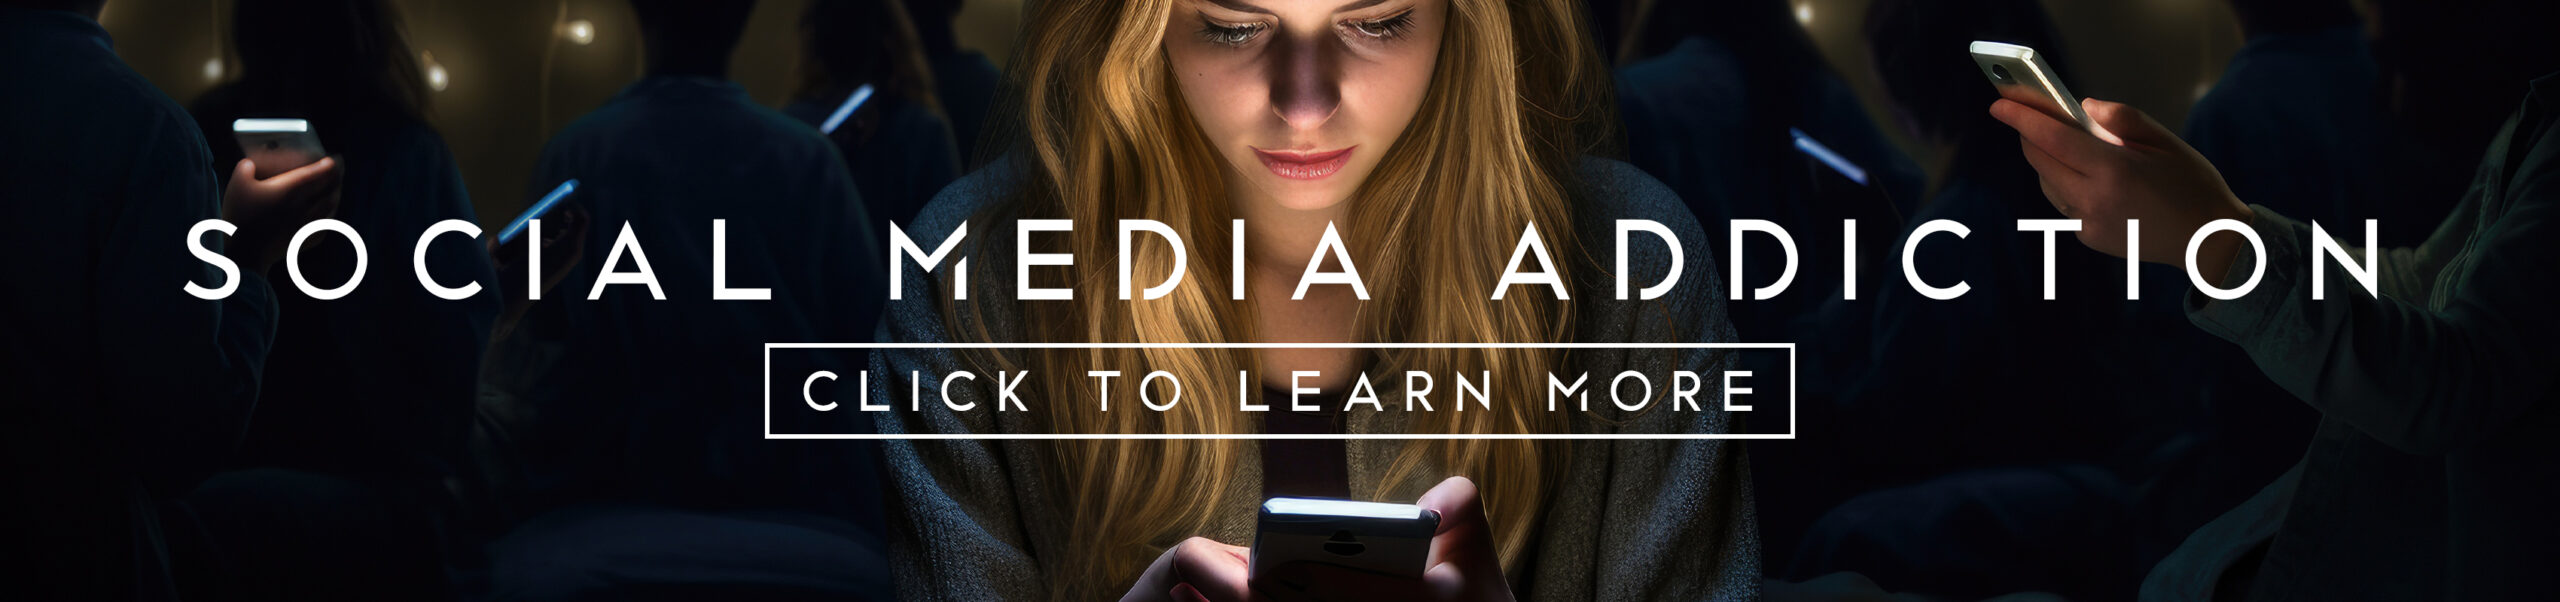 Social Media Addiction banner image with blonde girl looking into her phone dark with others behind her